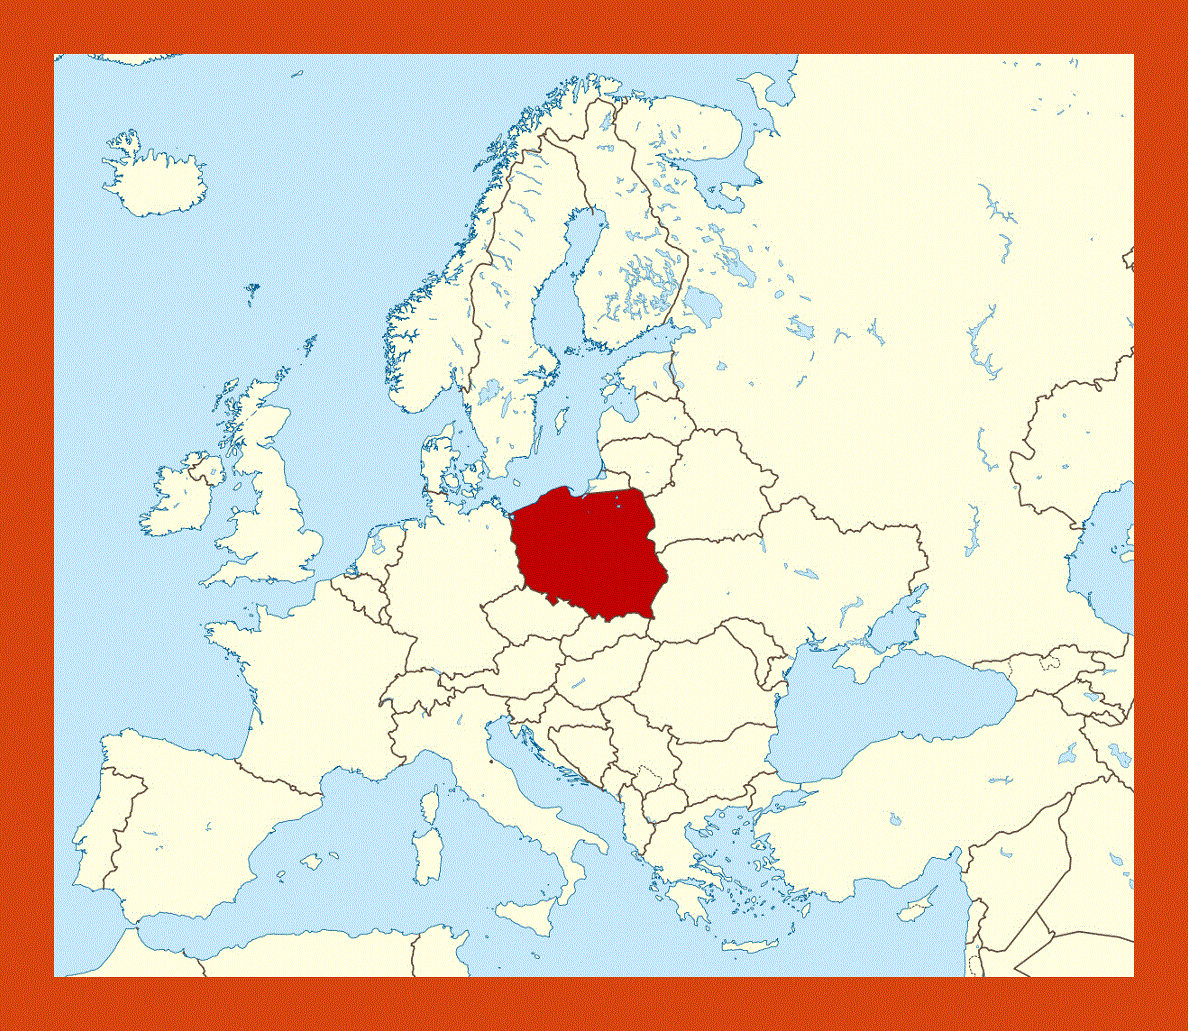 Location map of Poland in Europe